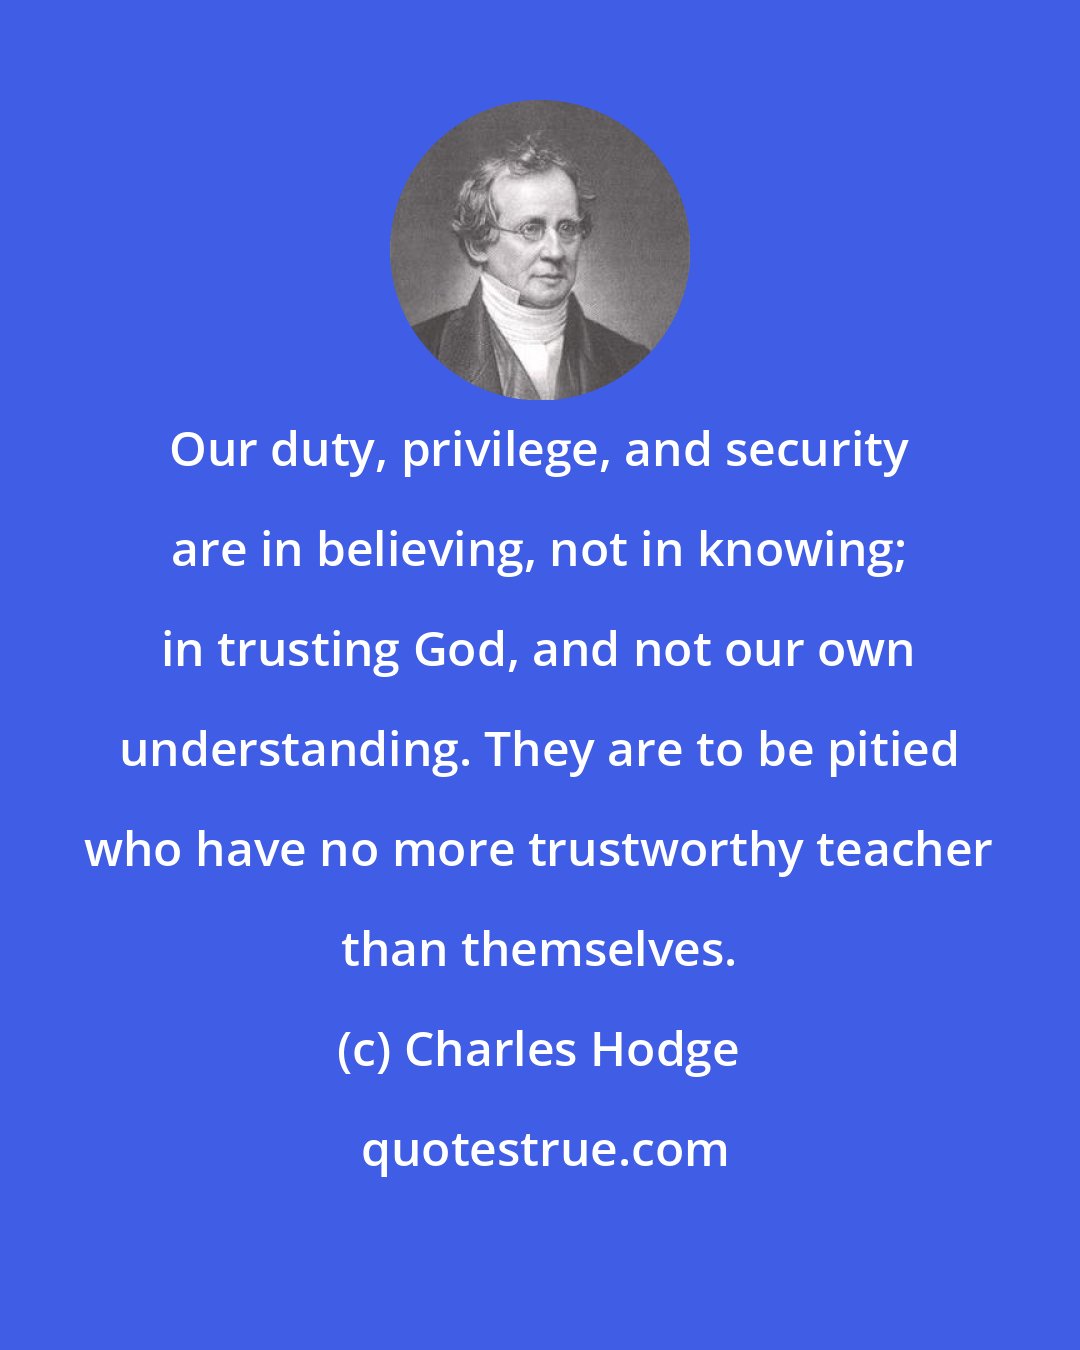 Charles Hodge: Our duty, privilege, and security are in believing, not in knowing; in trusting God, and not our own understanding. They are to be pitied who have no more trustworthy teacher than themselves.